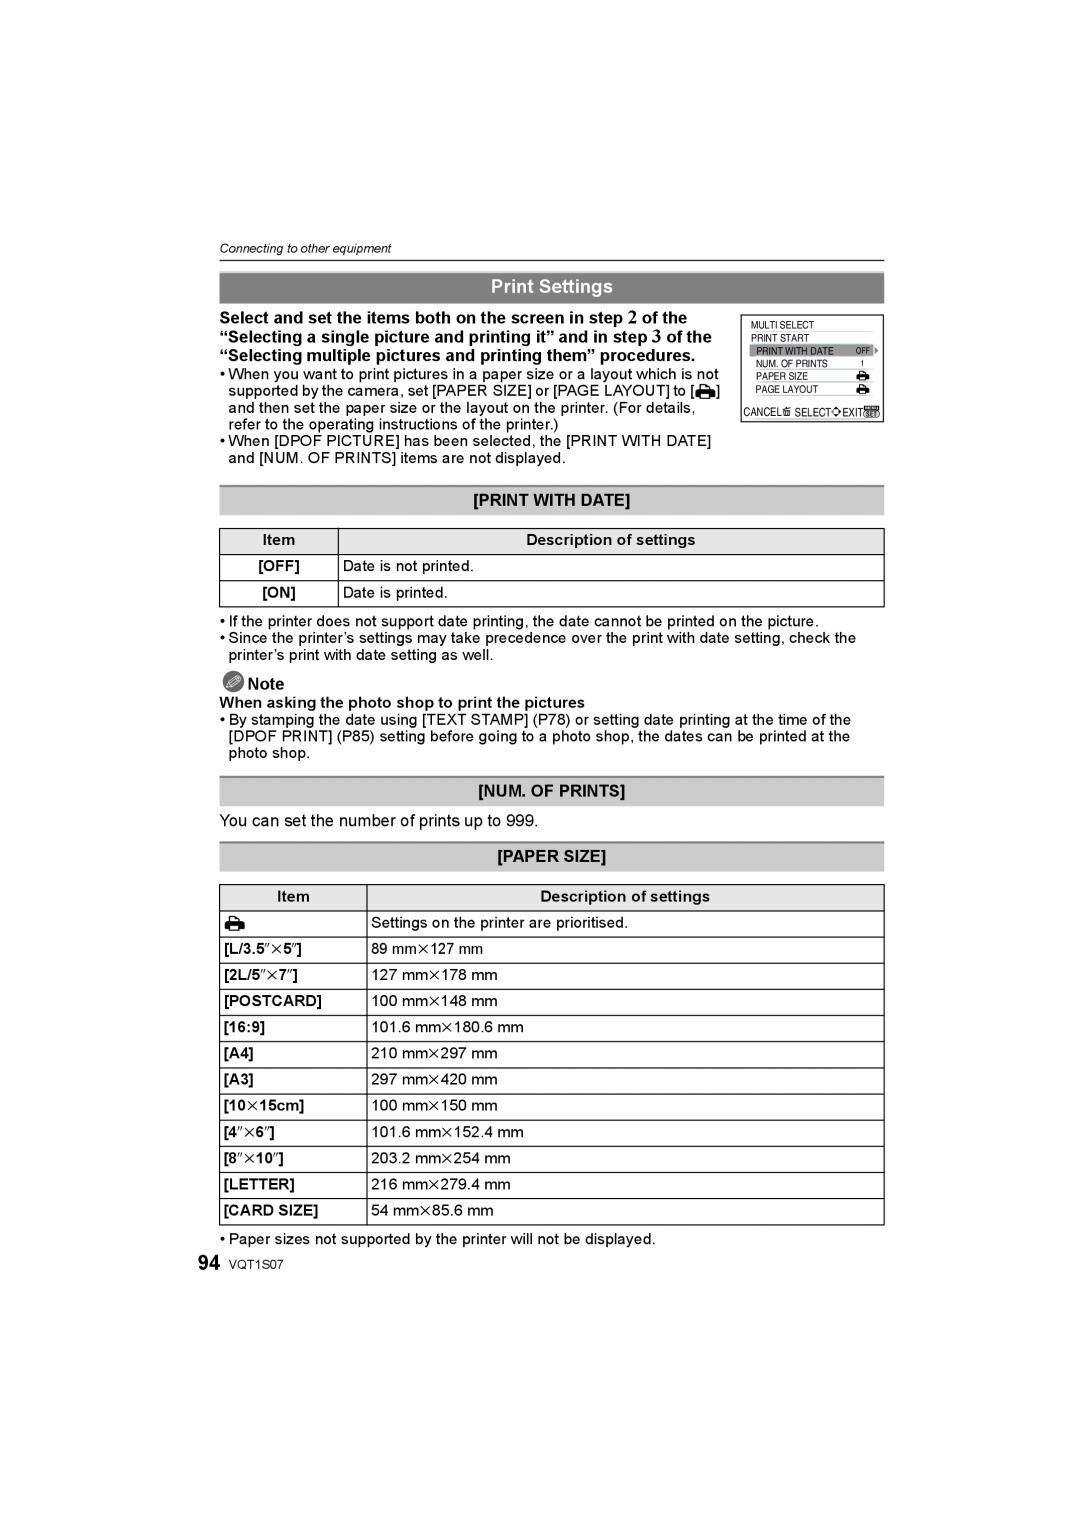 Panasonic DMC-FX38 Print Settings, Print With Date, Num. Of Prints, You can set the number of prints up to, Paper Size 